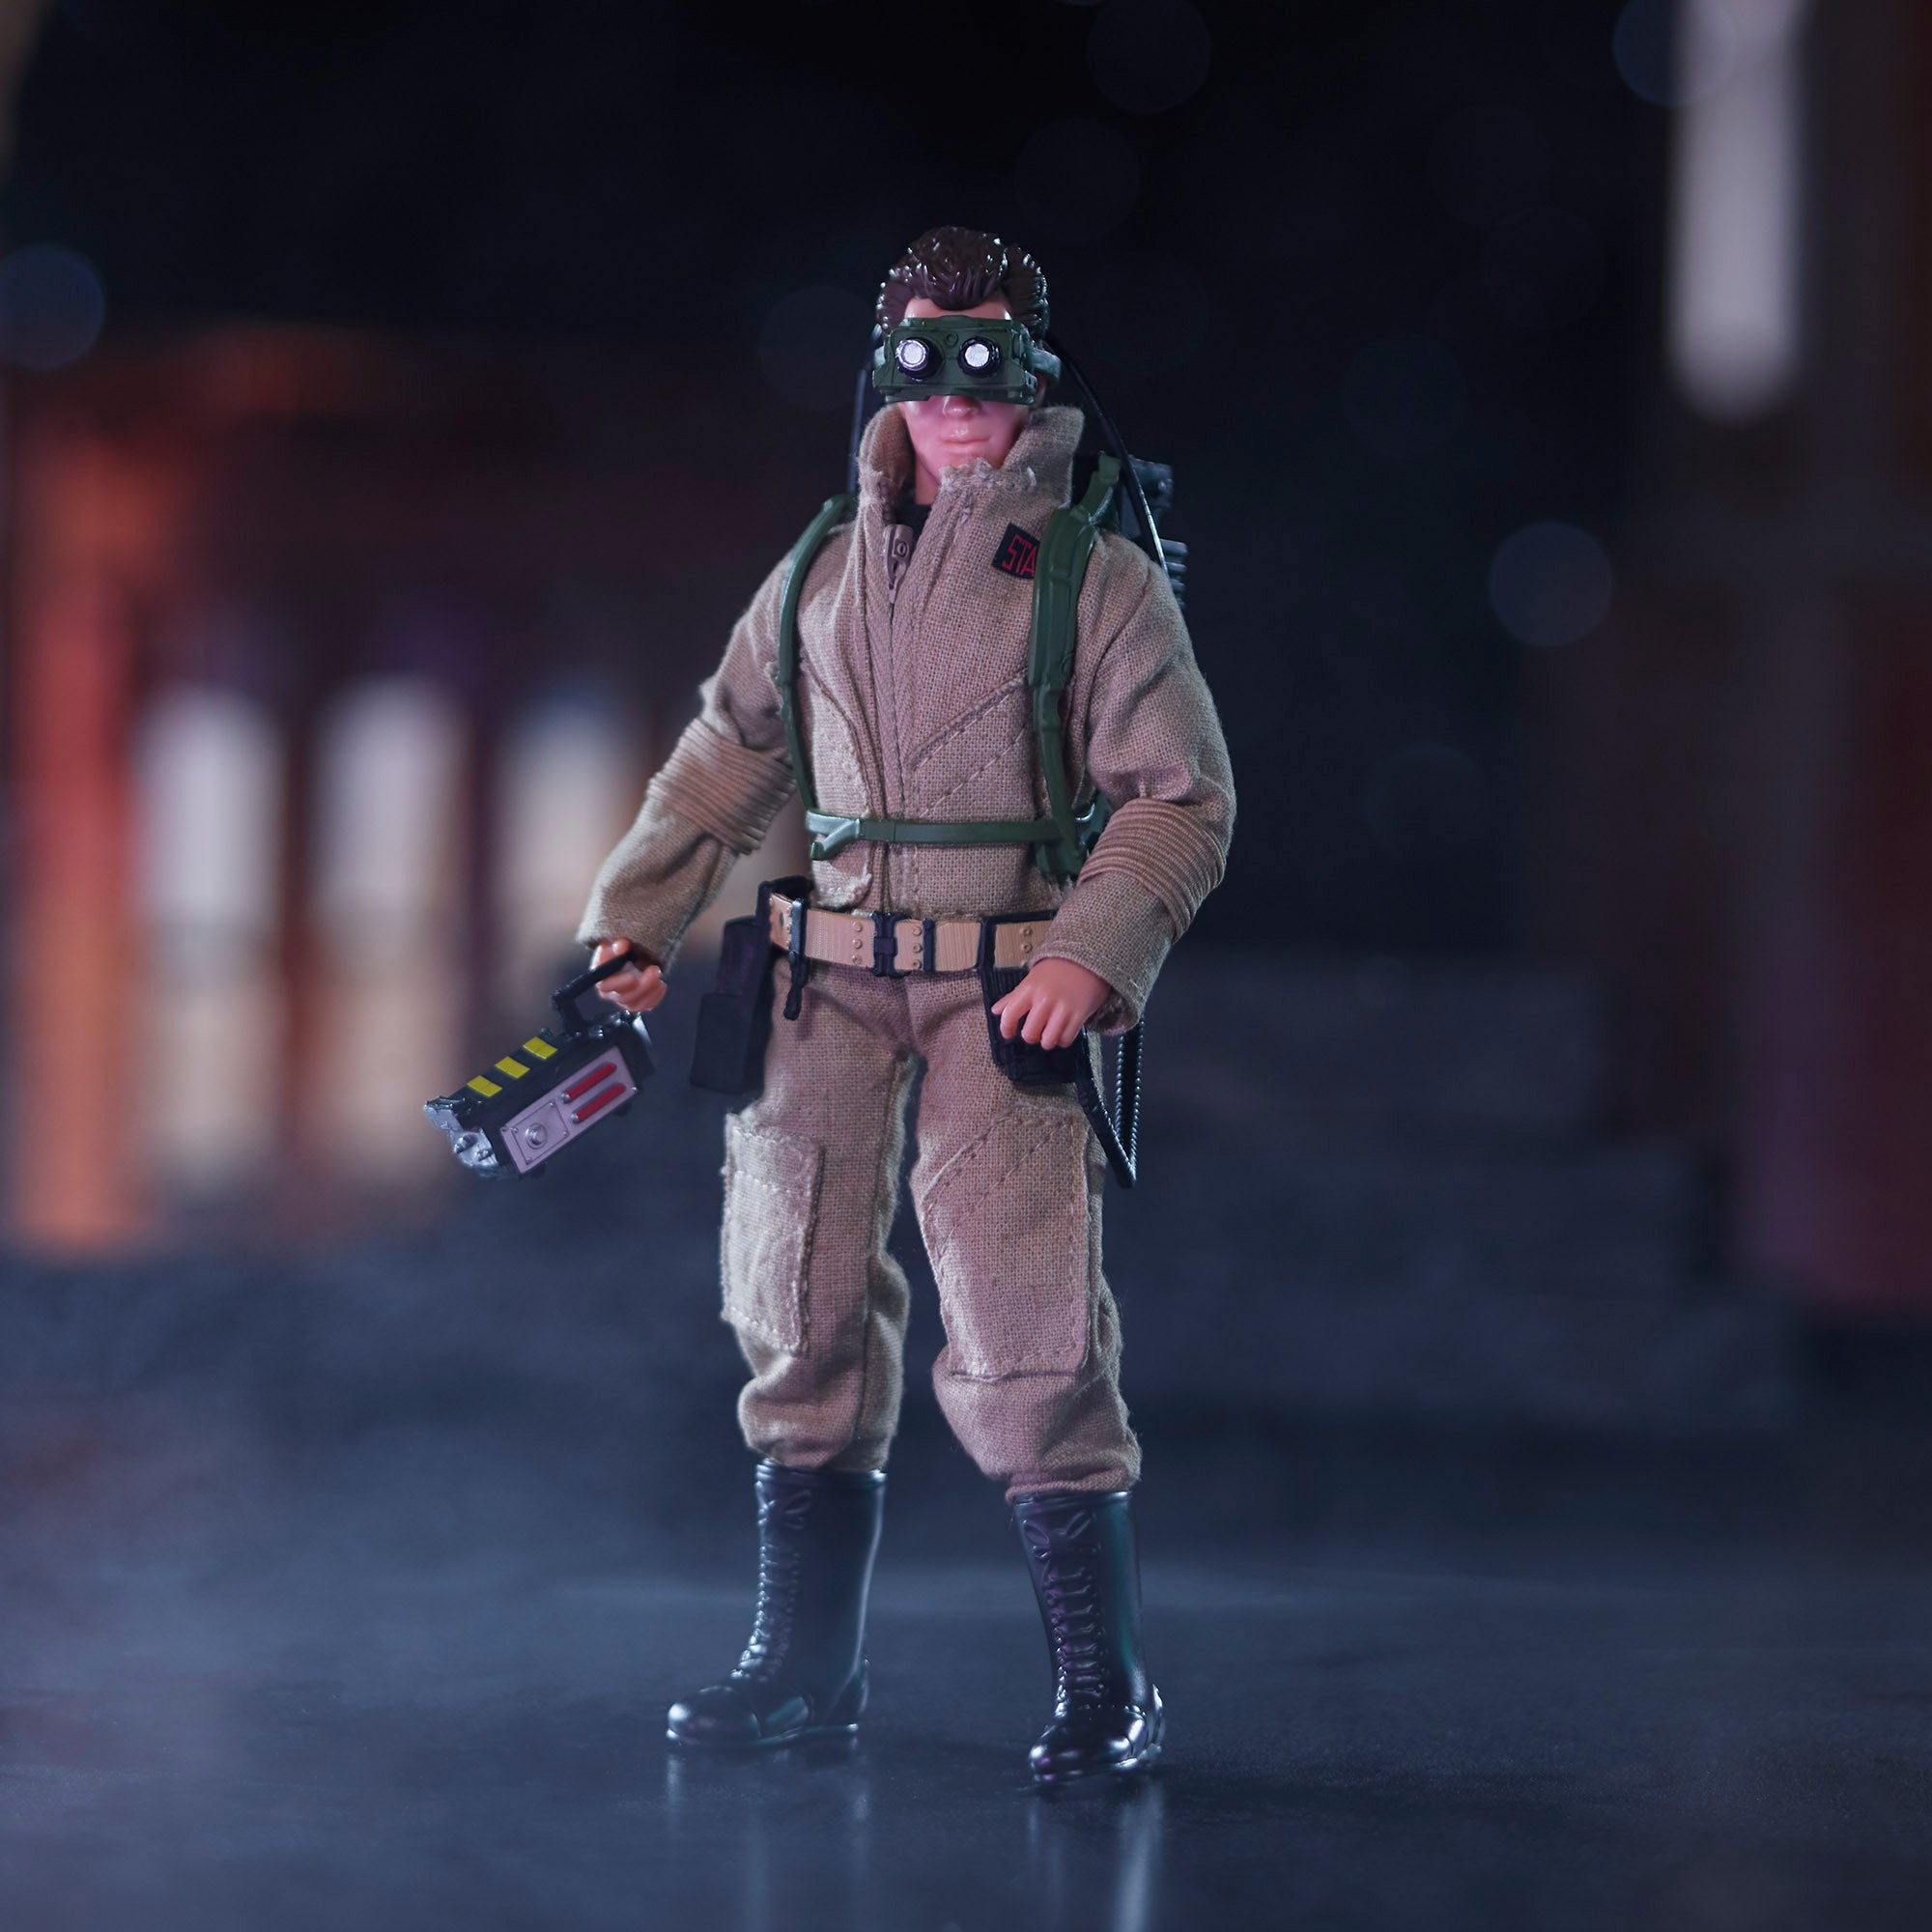 Ghostbusters x Mego 7